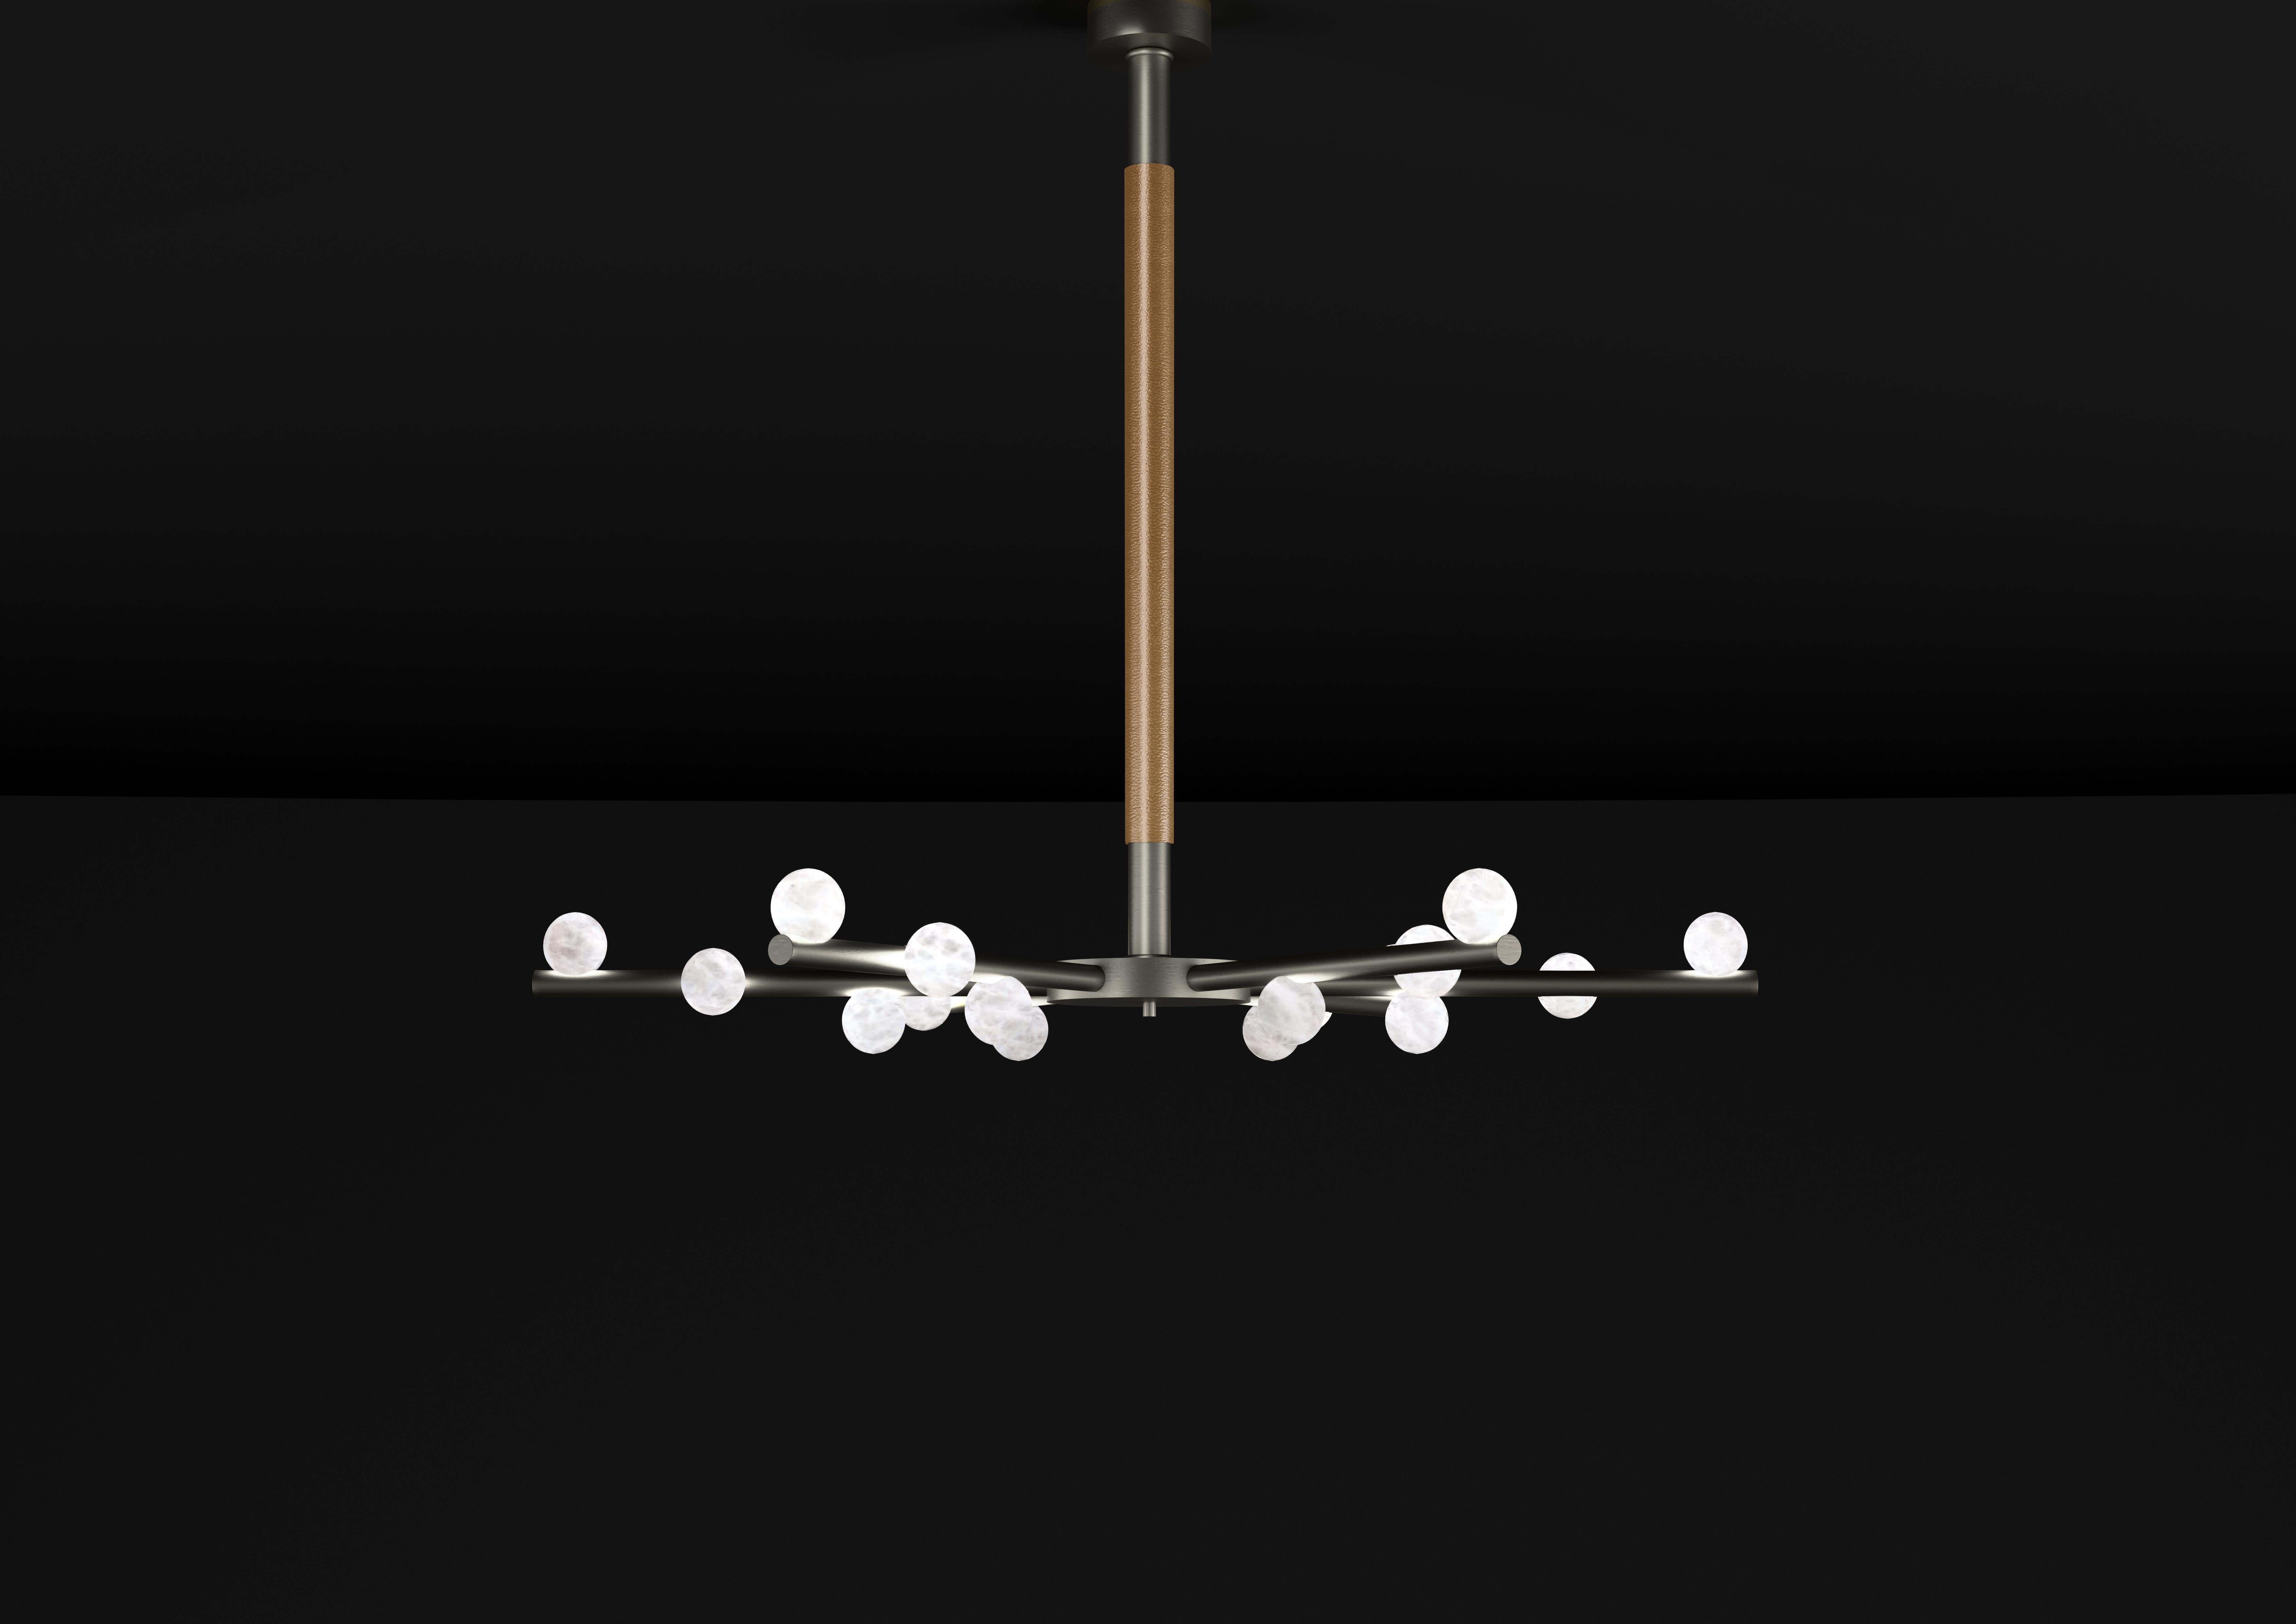 Demetra Brushed Black Metal Chandelier by Alabastro Italiano
Dimensions: D 85 x W 97 x H 85 cm.
Materials: White alabaster, brushed black metal and leather.

Available in different finishes: Shiny Silver, Bronze, Brushed Brass, Ruggine of Florence,